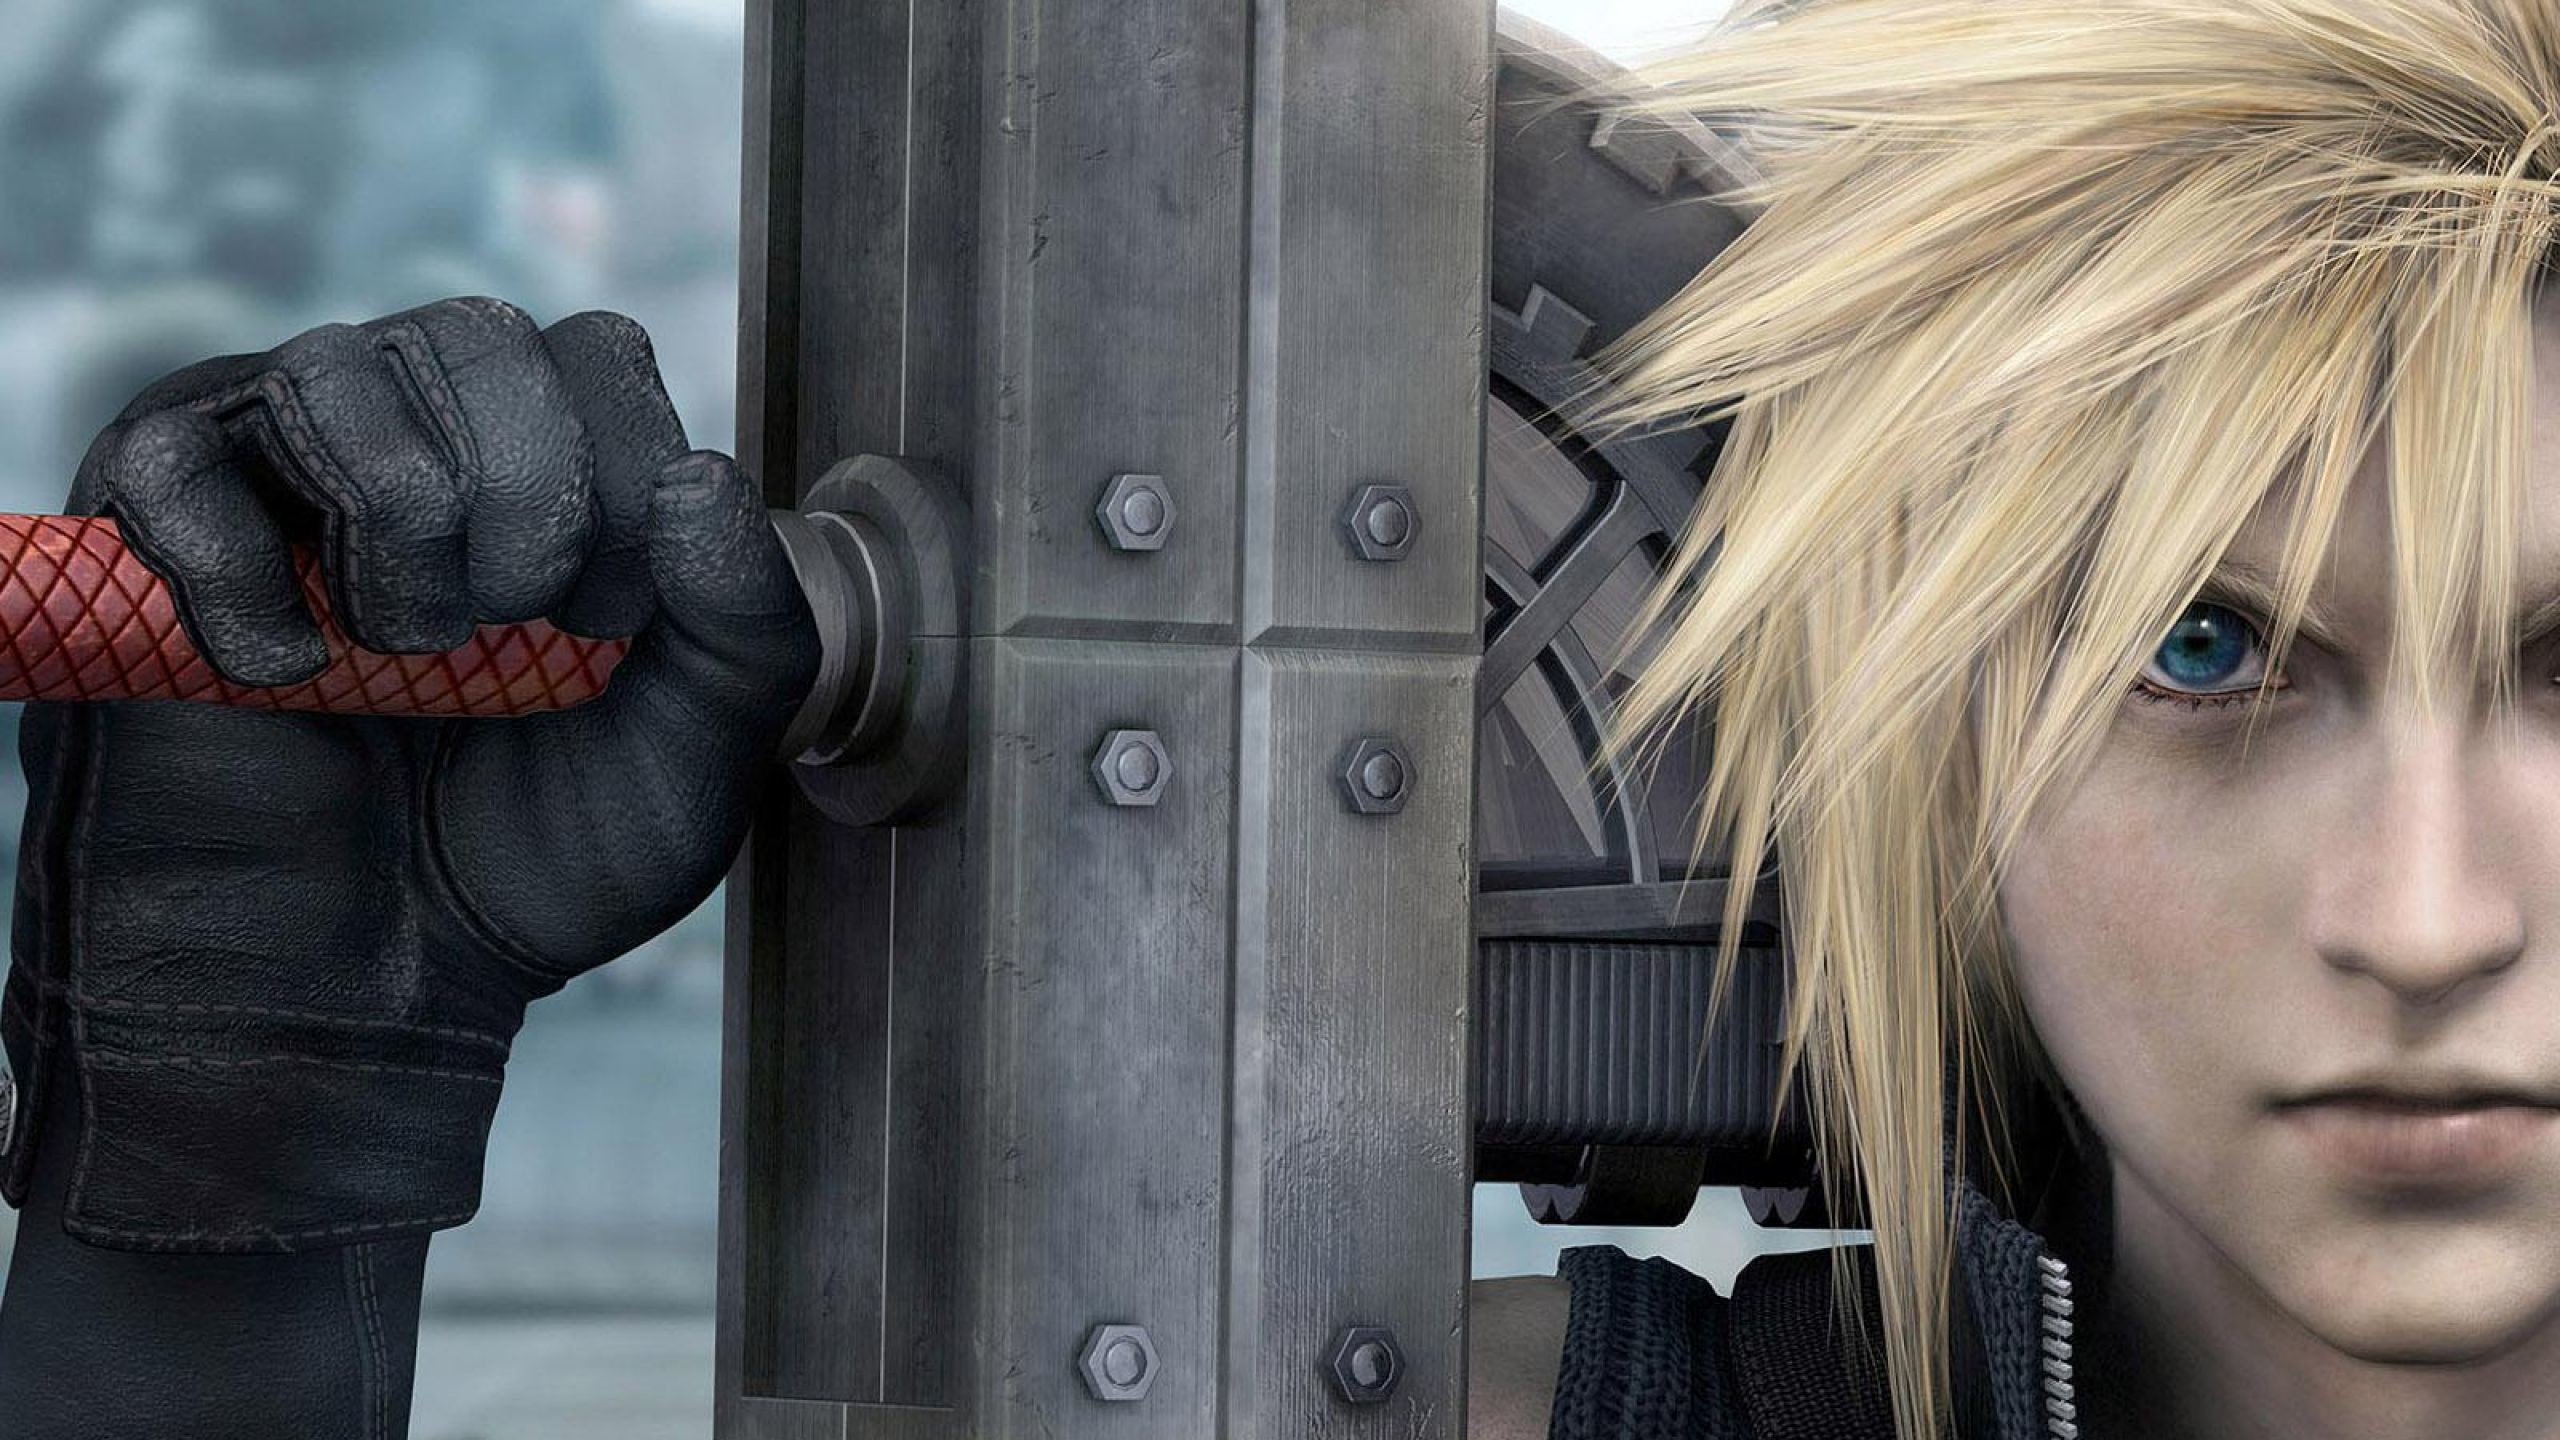 Cloud Strife Wallpaper HD (67+ images)